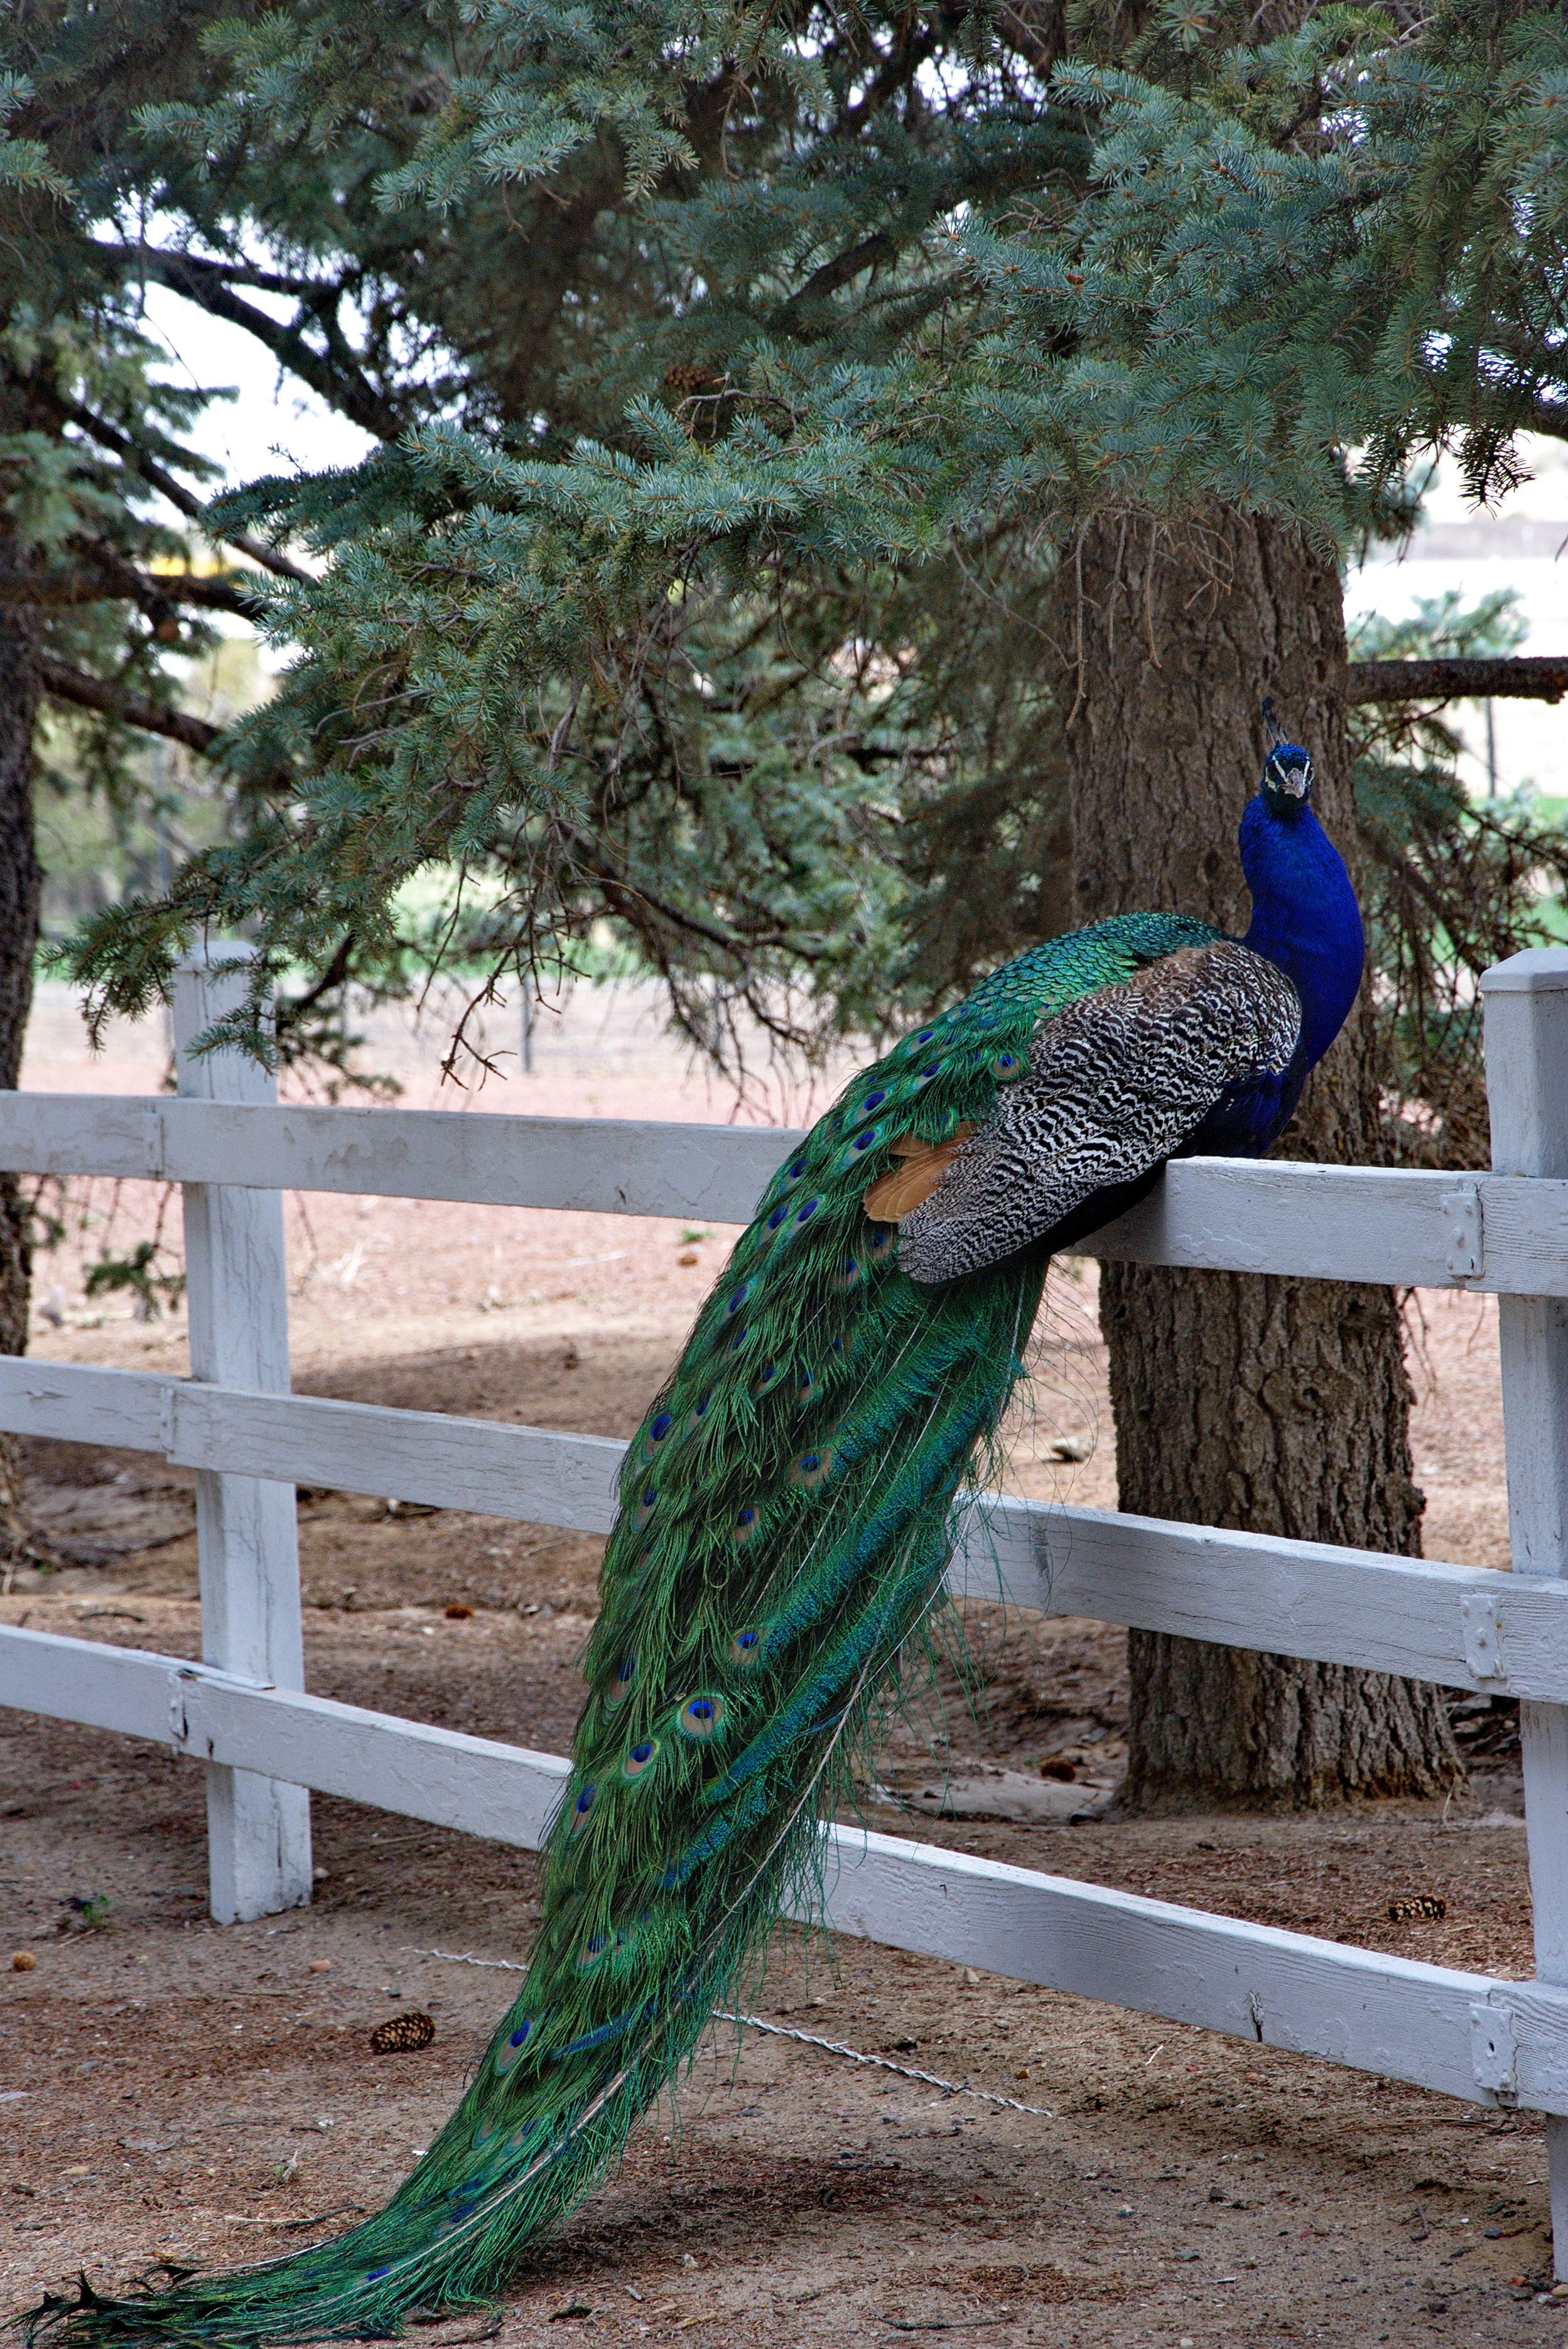 Visit the B-Square Ranch and Experimental Farm and you’ll see peacocks, emus, and wild turkeys milling about. The ranch is also home to some 400 deer and tens of thousands of waterfowl. Photo by killbox via Flickr.